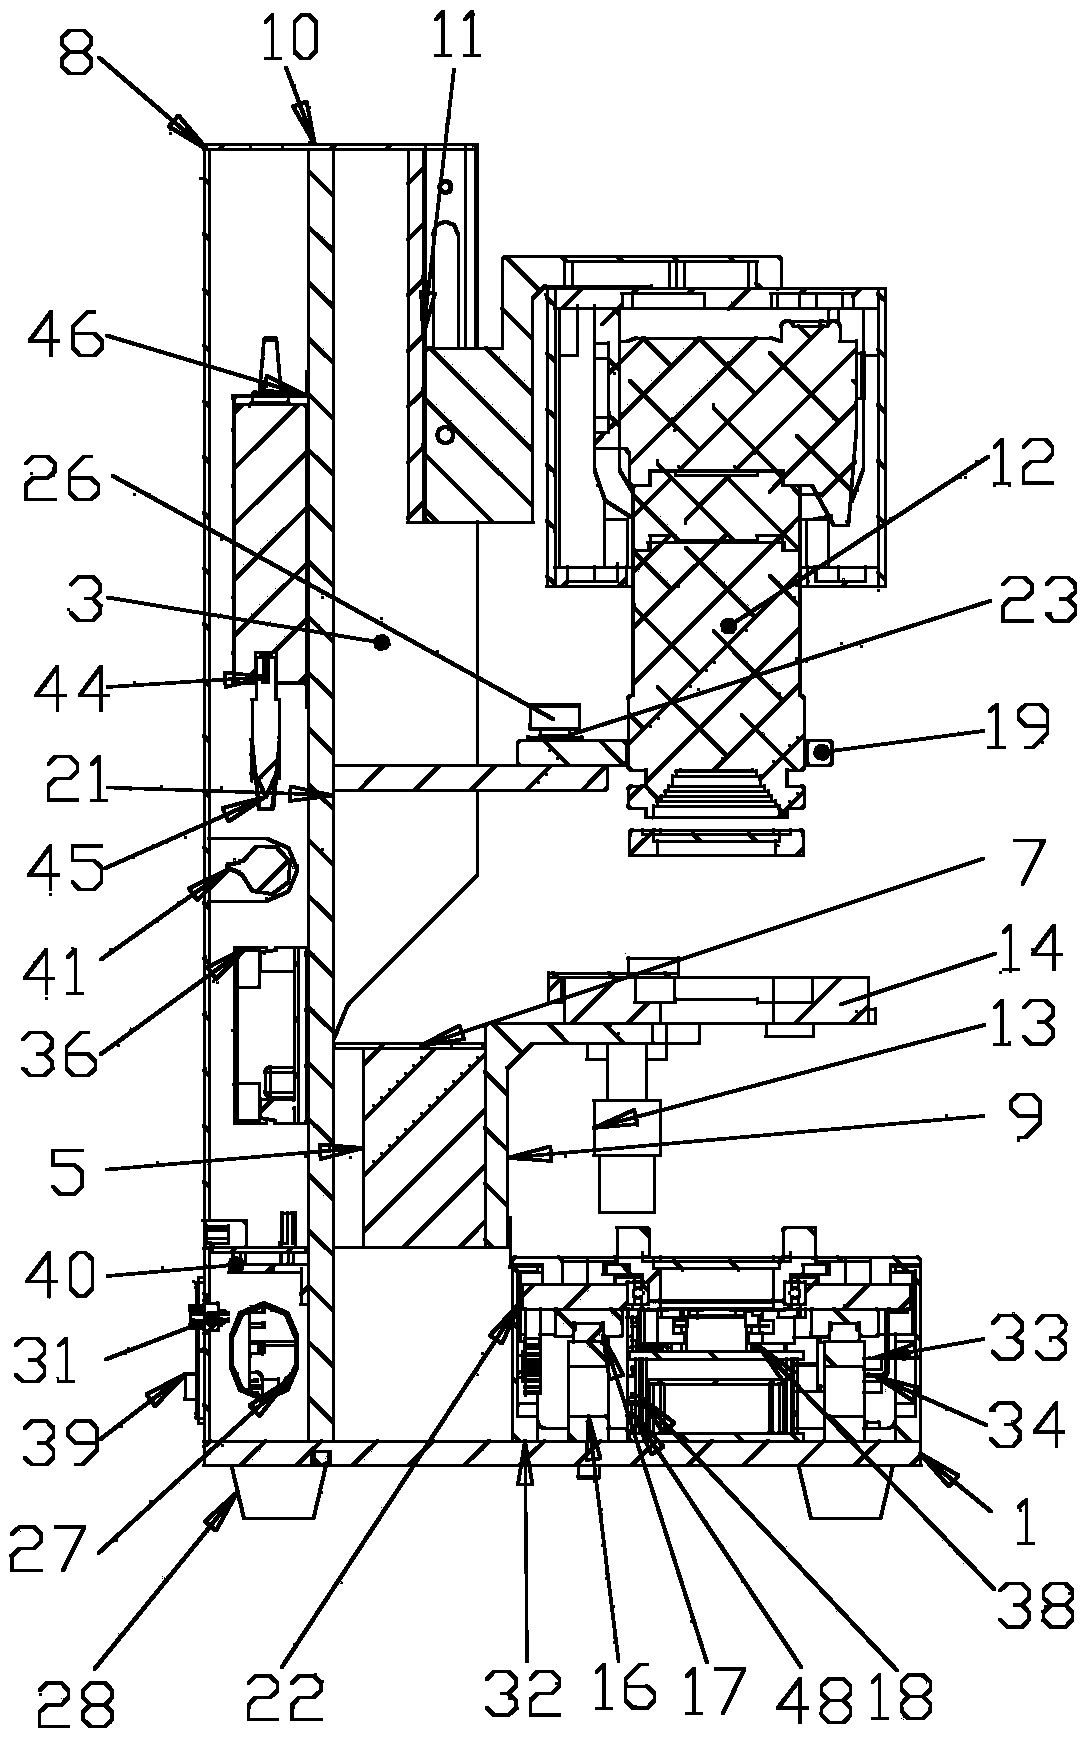 Polarizing microscopic image automatic acquisition and analysis device